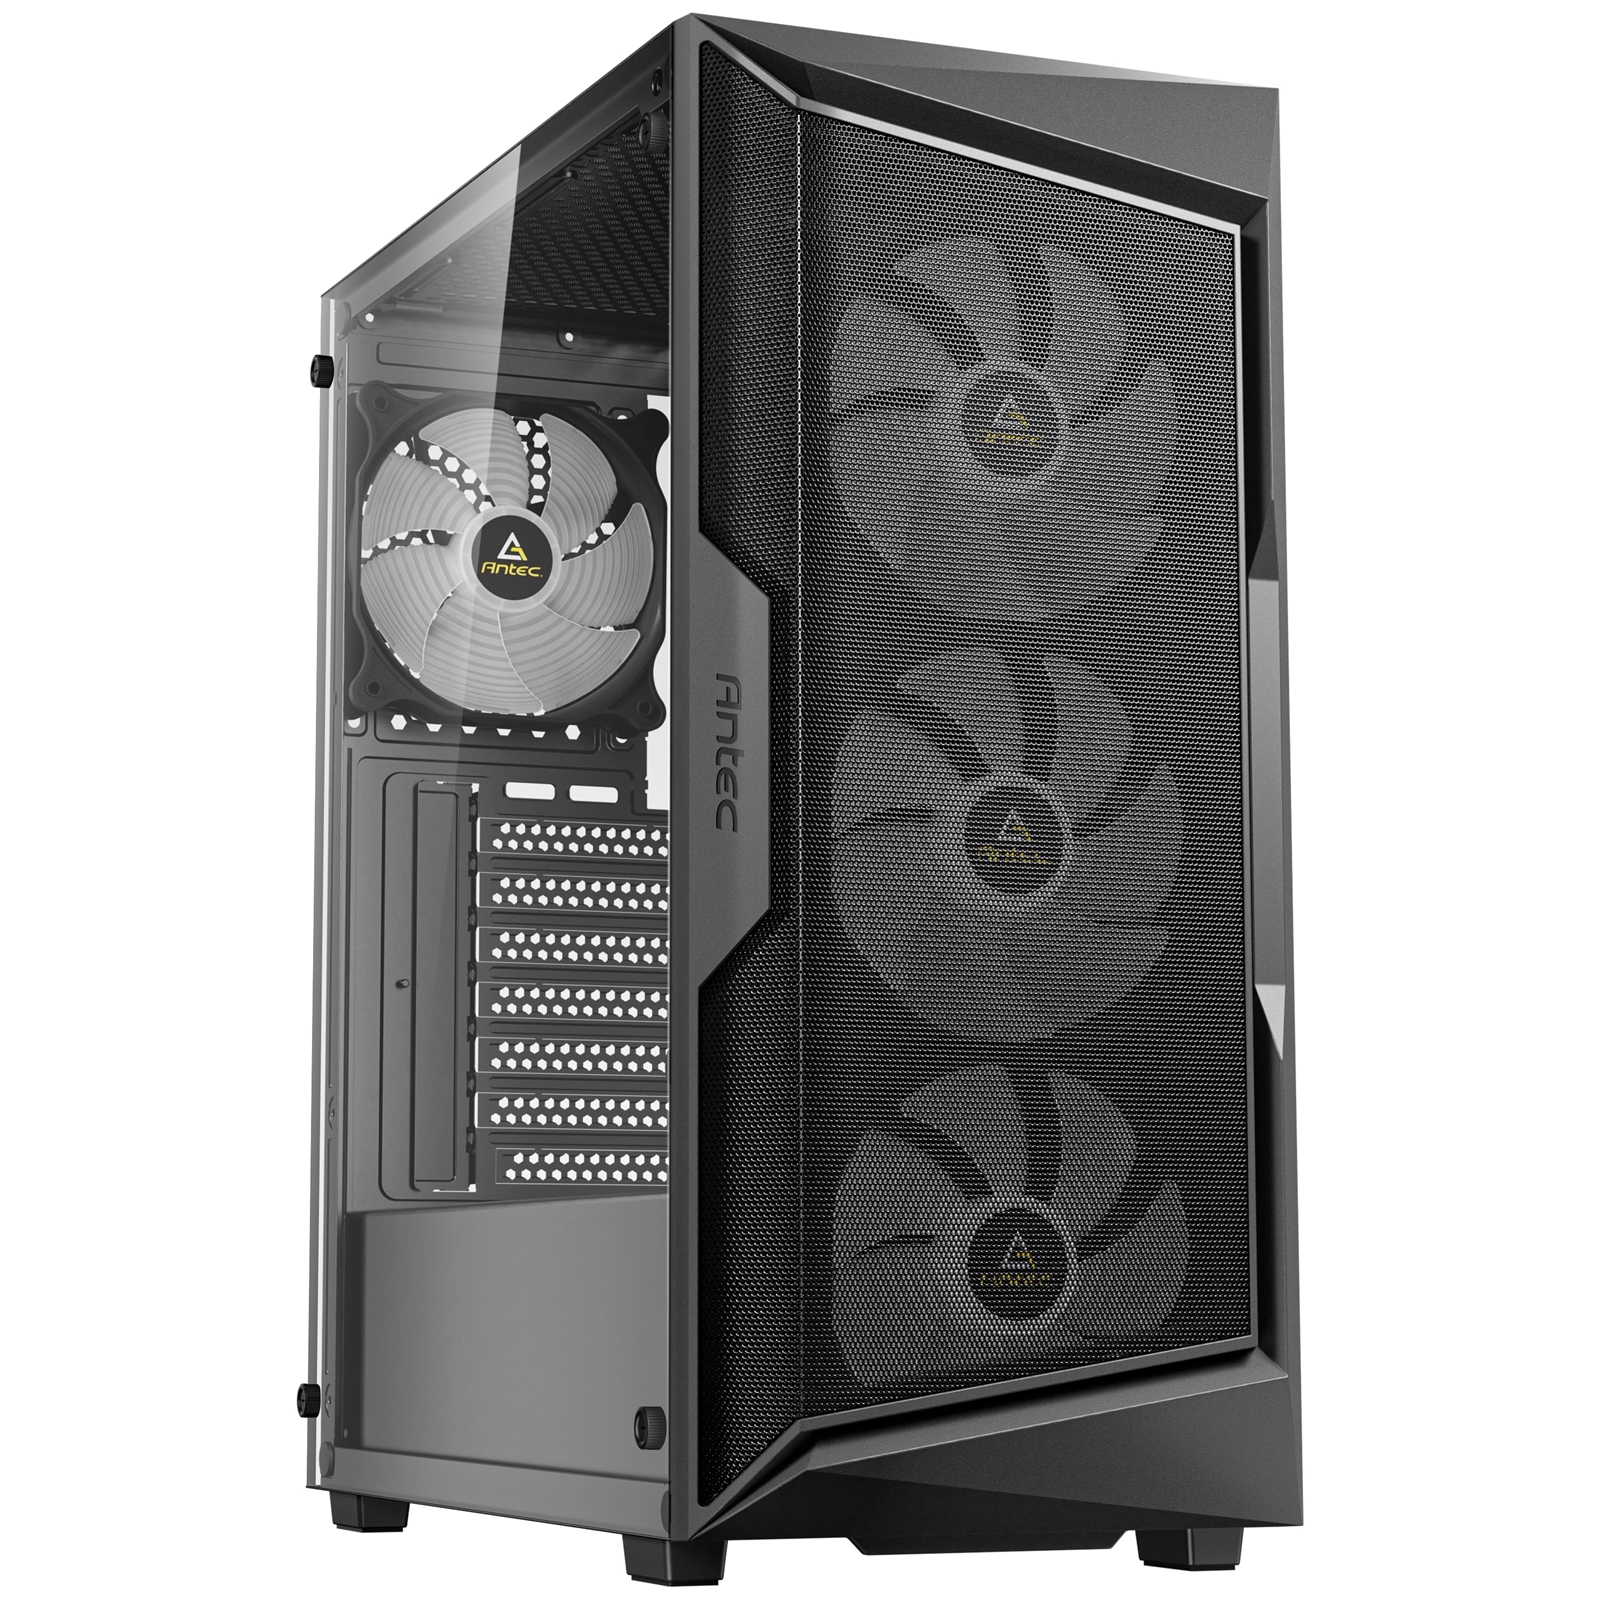 Antec AX61 Elite: Mid-Tower ATX Gaming Case with High-Airflow Mesh Front Panel, 4 x 120mm ARGB Fans, Tempered Glass Side Panels, Support for Up to 8 Fans,